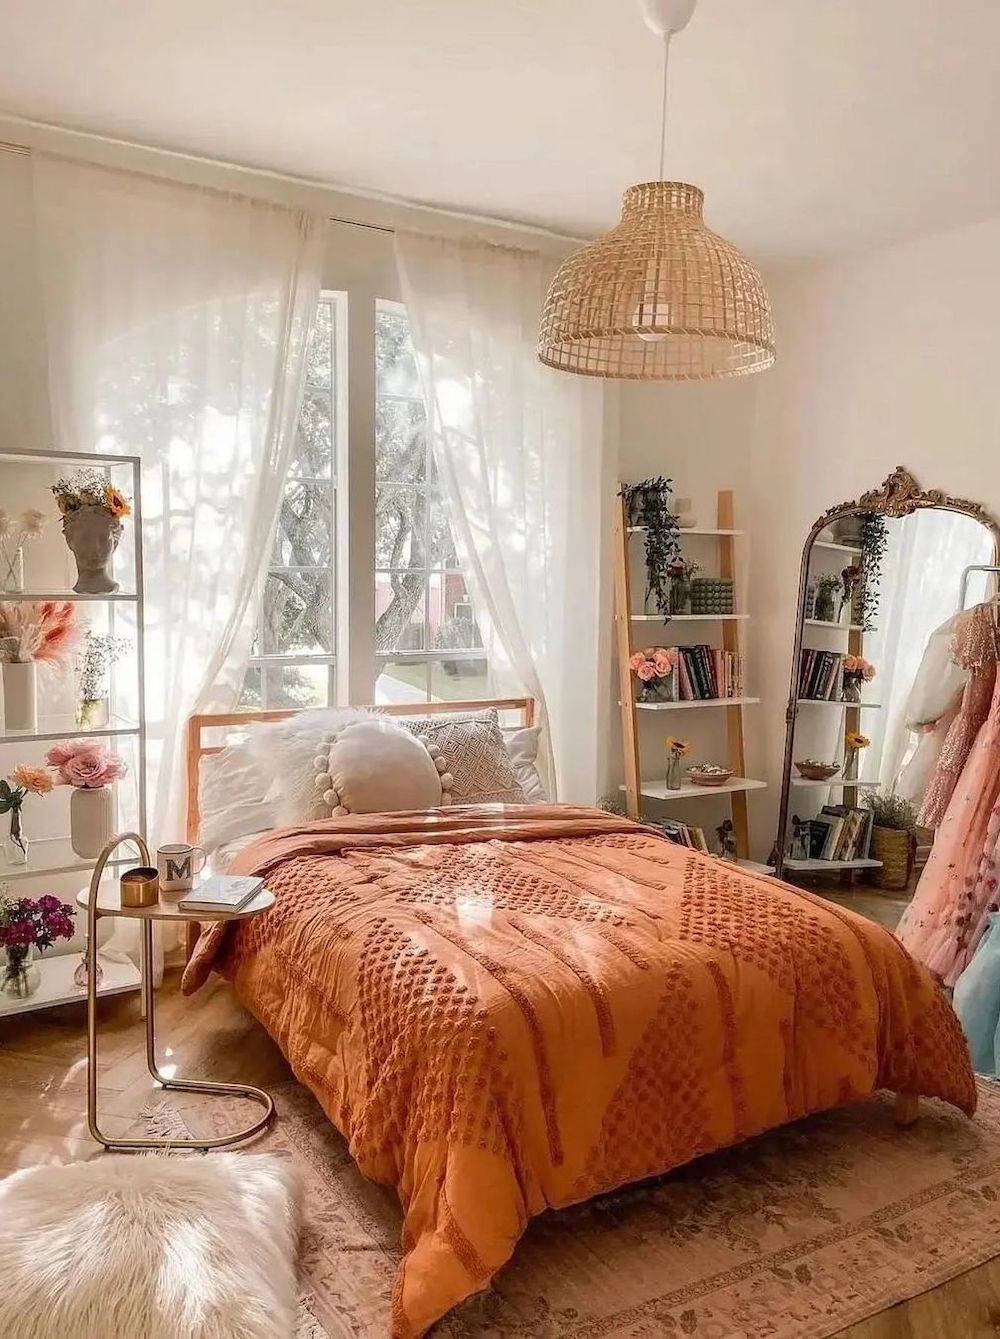 a feminine boho bedroom with pink and orange tones, florals, faux fur accents, and a statement raffia lighting fixture